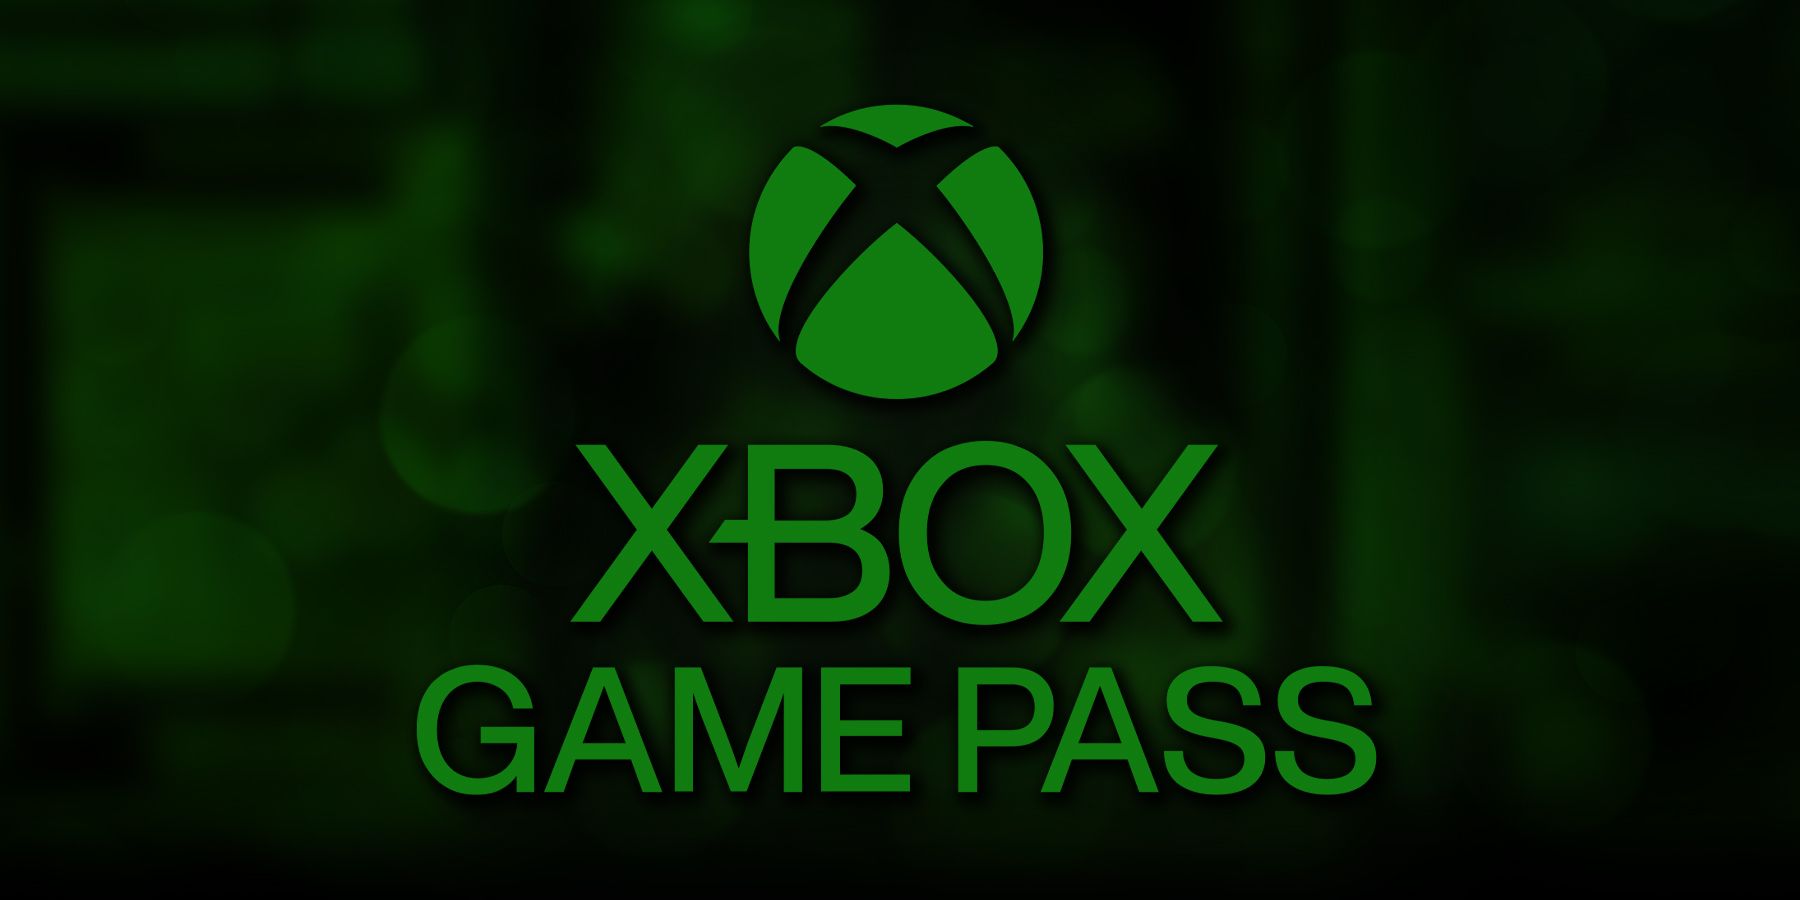 xbox game pass logo over blurred green background